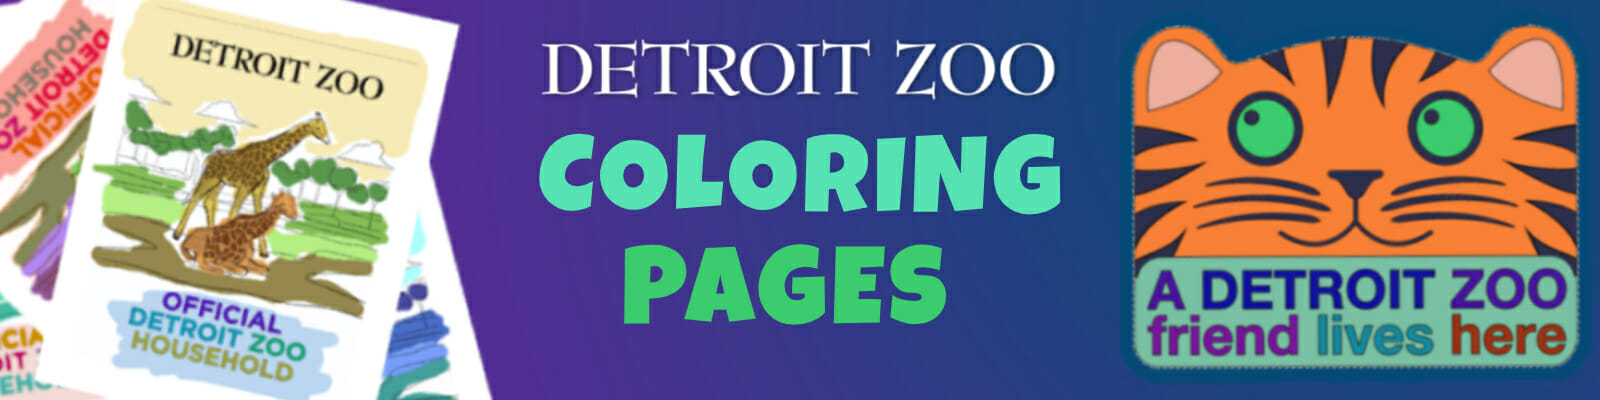 Detroit Zoo Coloring Pages banner